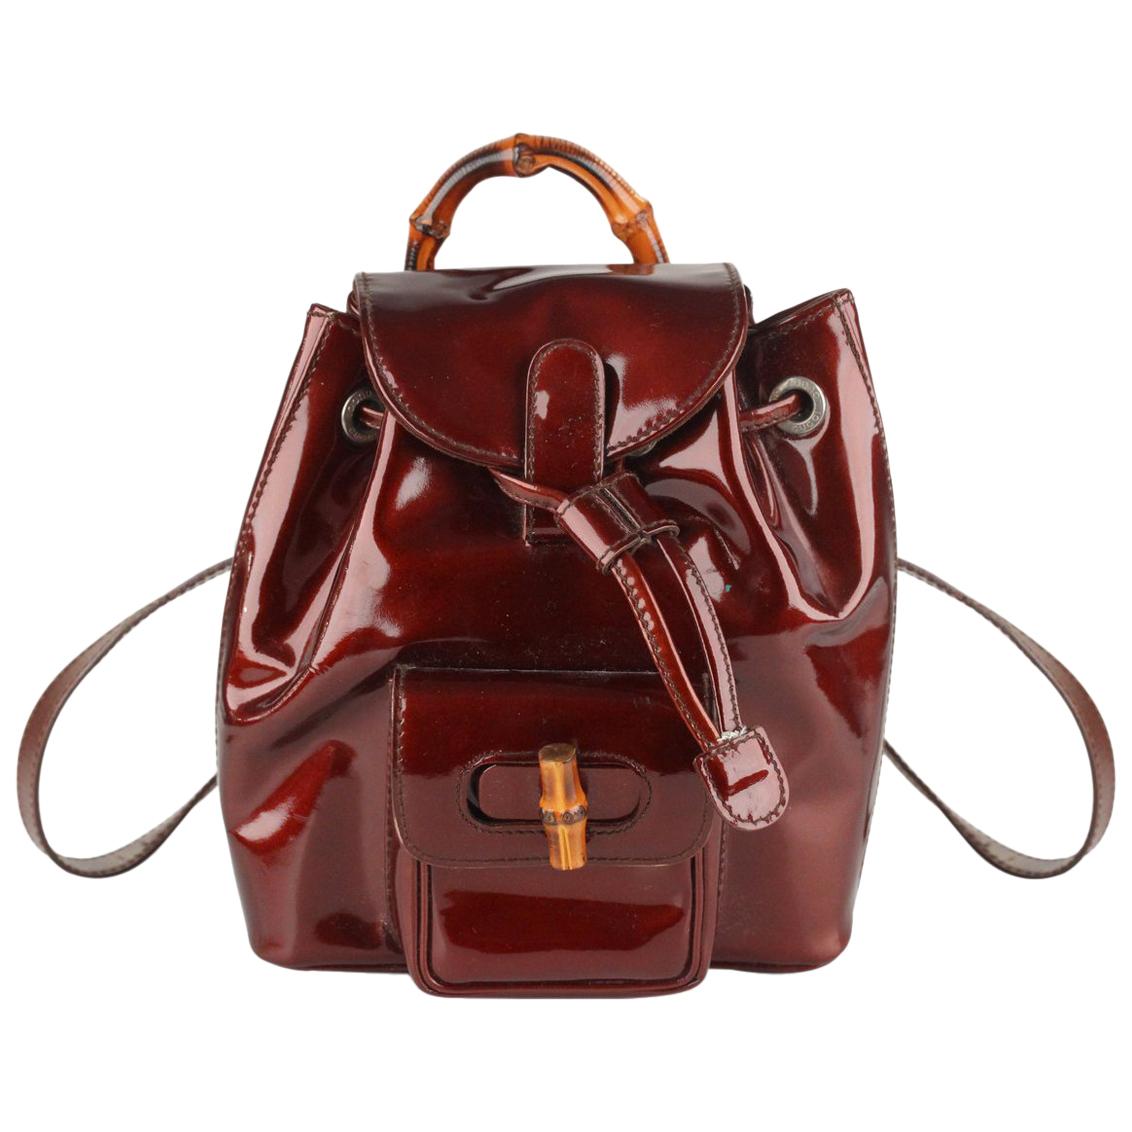 Gucci Brown Patent Leather Mini Bamboo Backpack Shoulder Bag